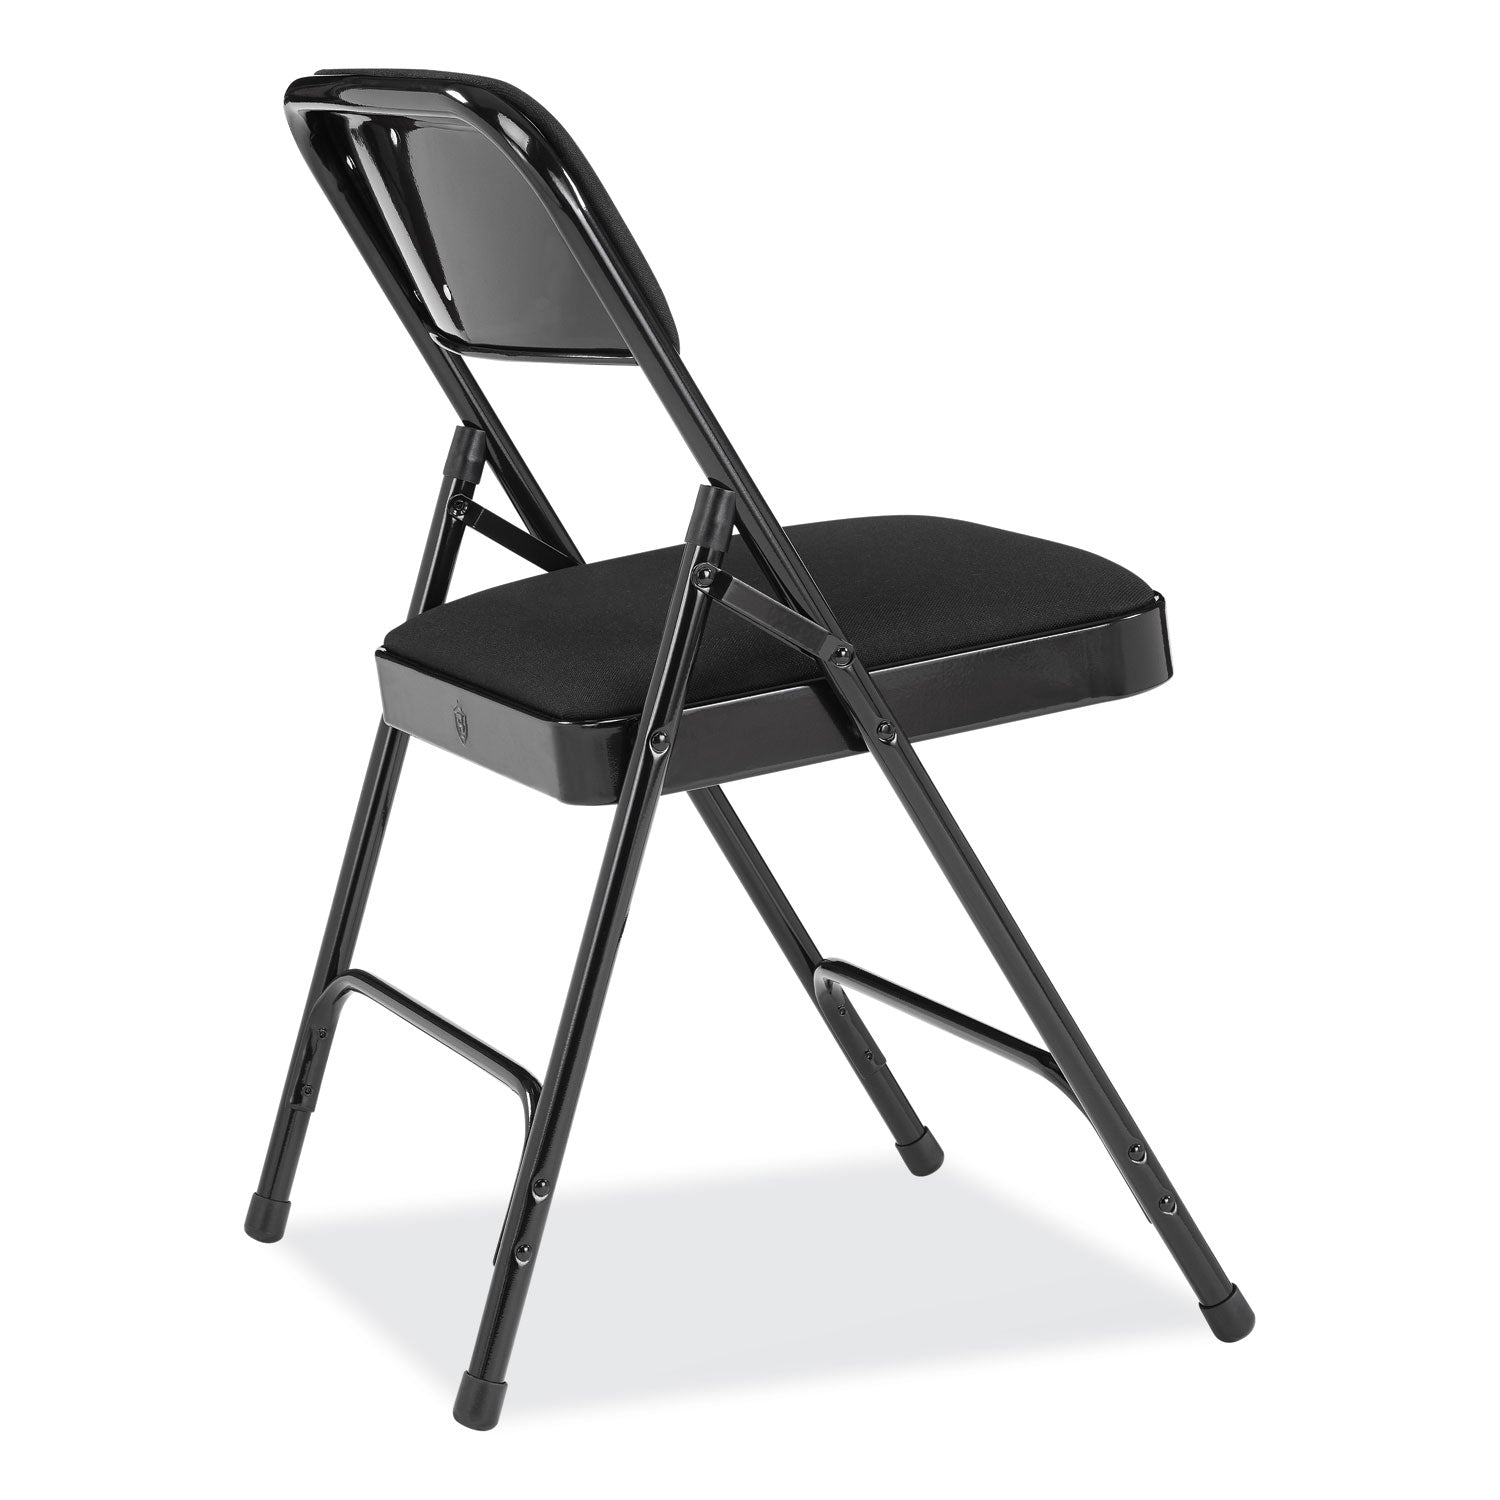 2200-series-fabric-dual-hinge-folding-chair-supports-500-lb-midnight-black-seat-back-black-base4-ctships-in-1-3-bus-days_nps2210 - 4